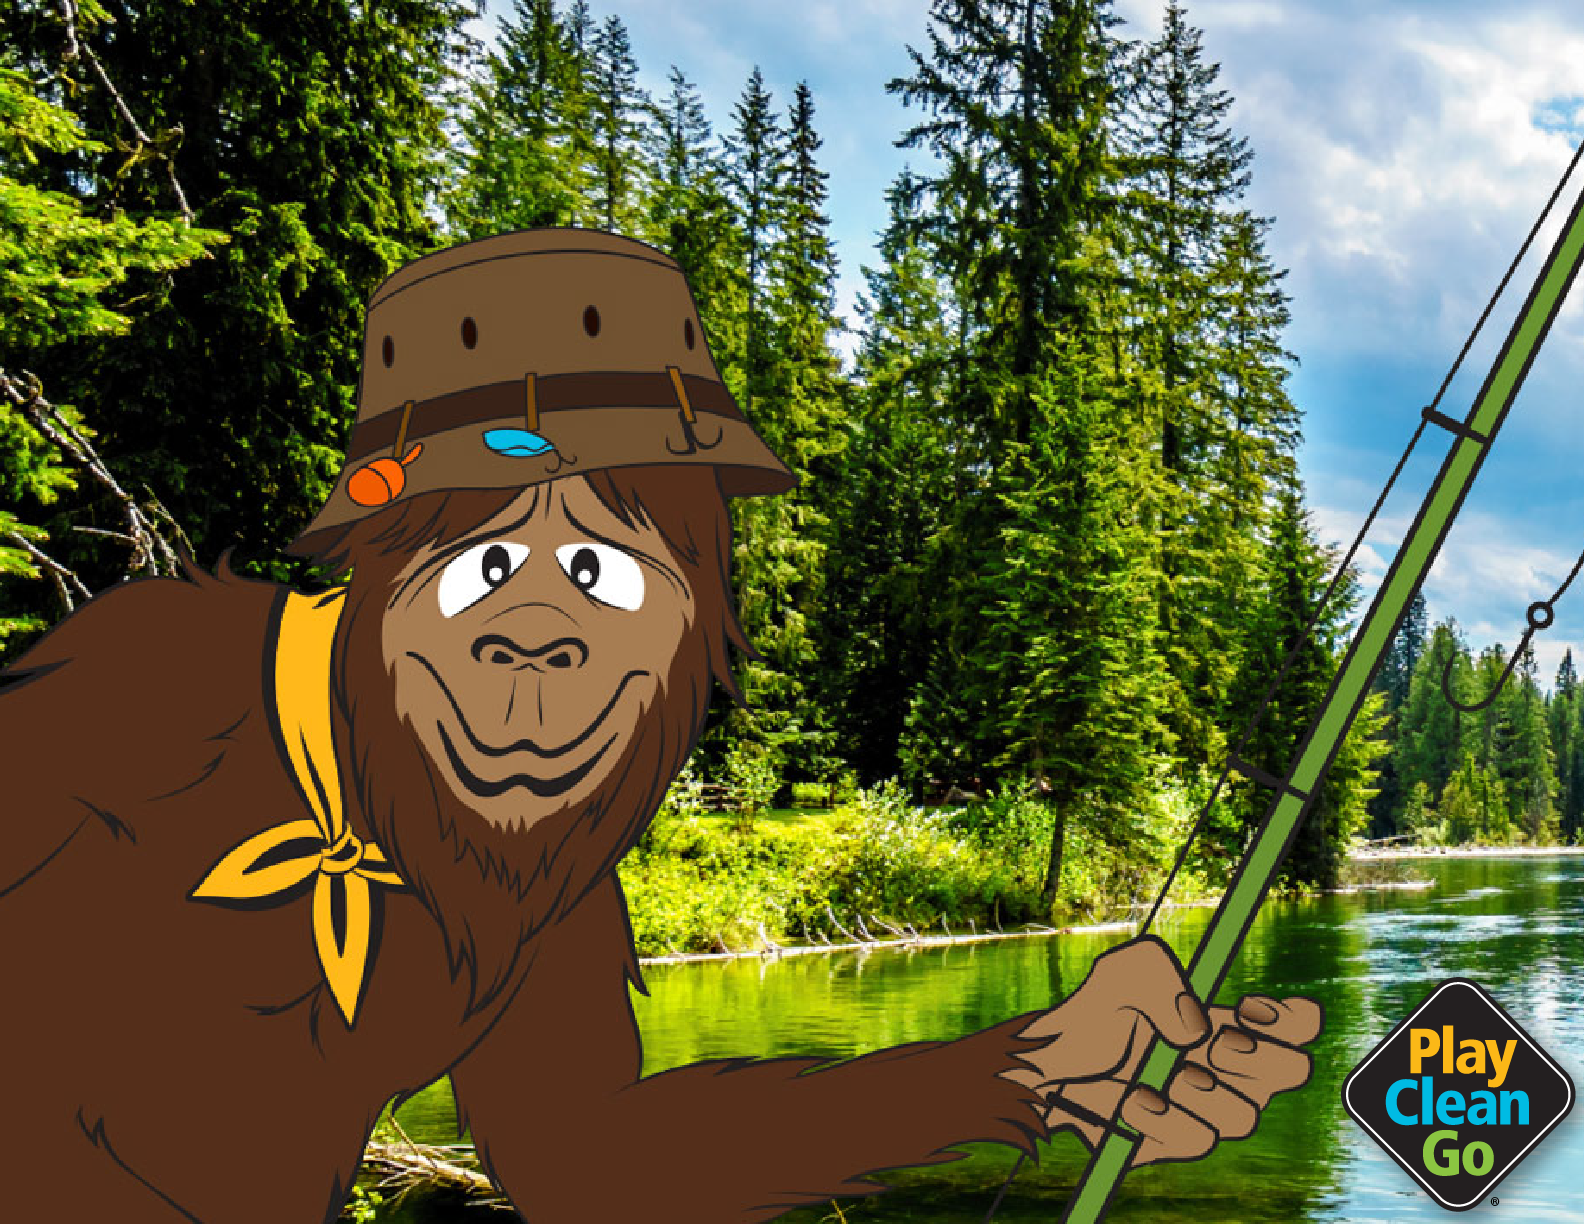 Bigfoot creature wears yellow-orange bandanna and fisher's cap, carrying a lime green fishing pole. In the background is a mountain lake with tall spruce trees.